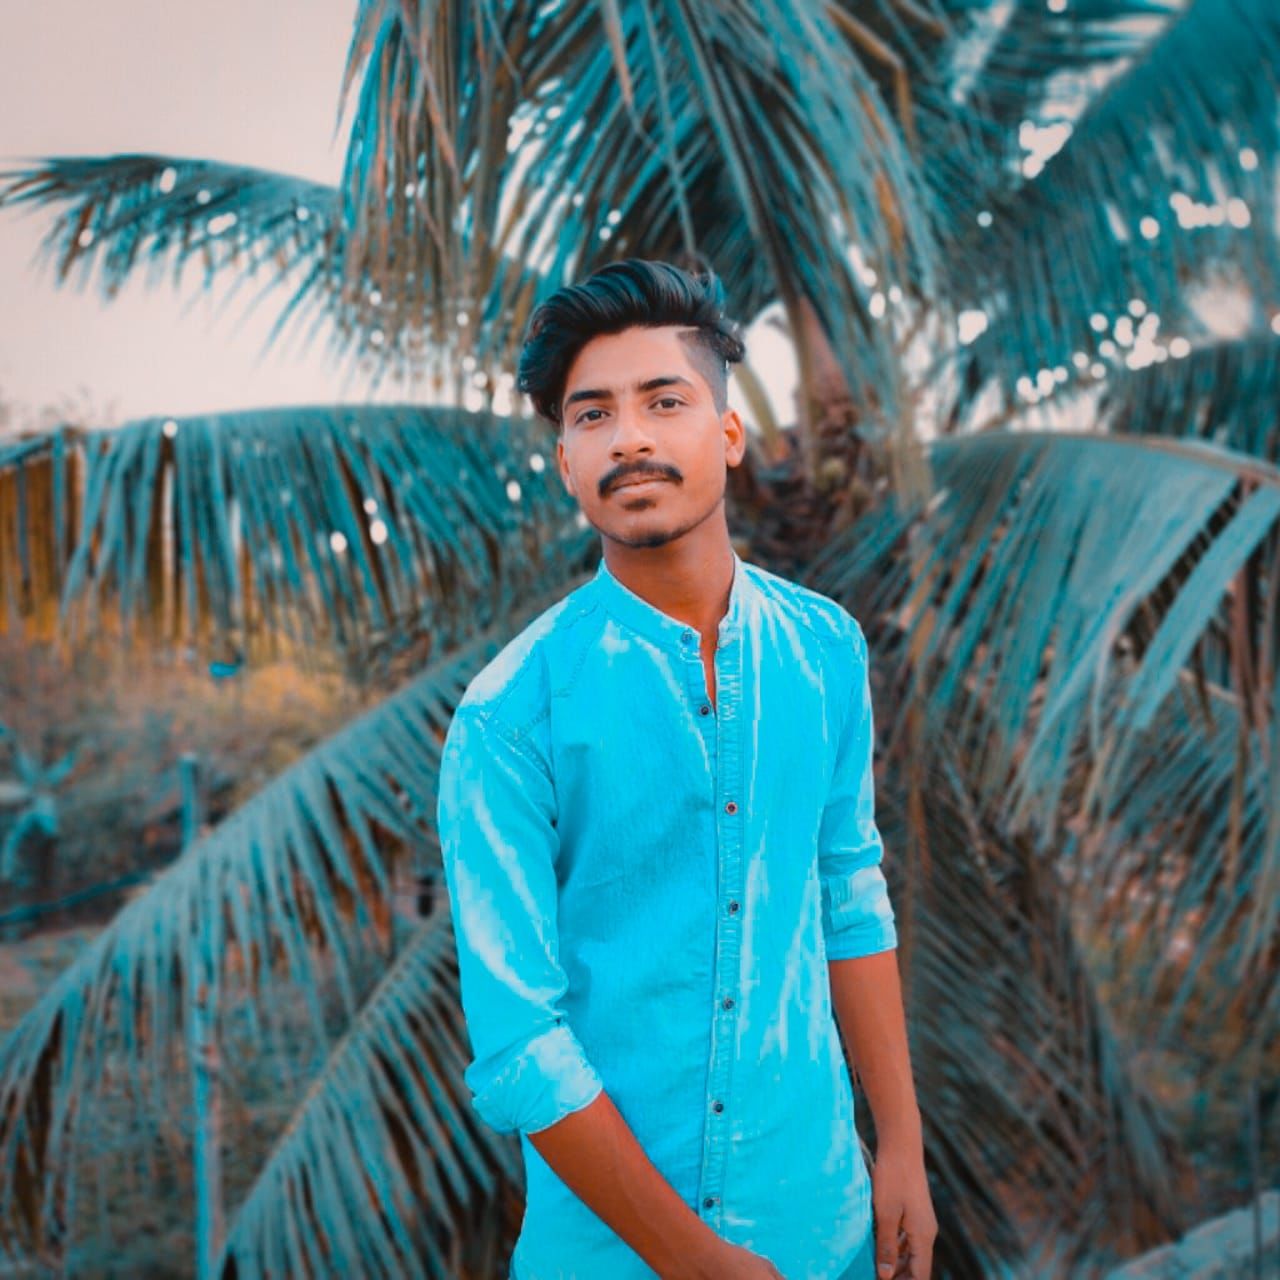 blue, one person, palm tree, tropical climate, adult, portrait, men, nature, standing, smiling, young adult, looking at camera, tree, clothing, front view, plant, person, vacation, emotion, land, happiness, waist up, outdoors, three quarter length, spring, looking, day, occupation, lifestyles, holiday, travel destinations